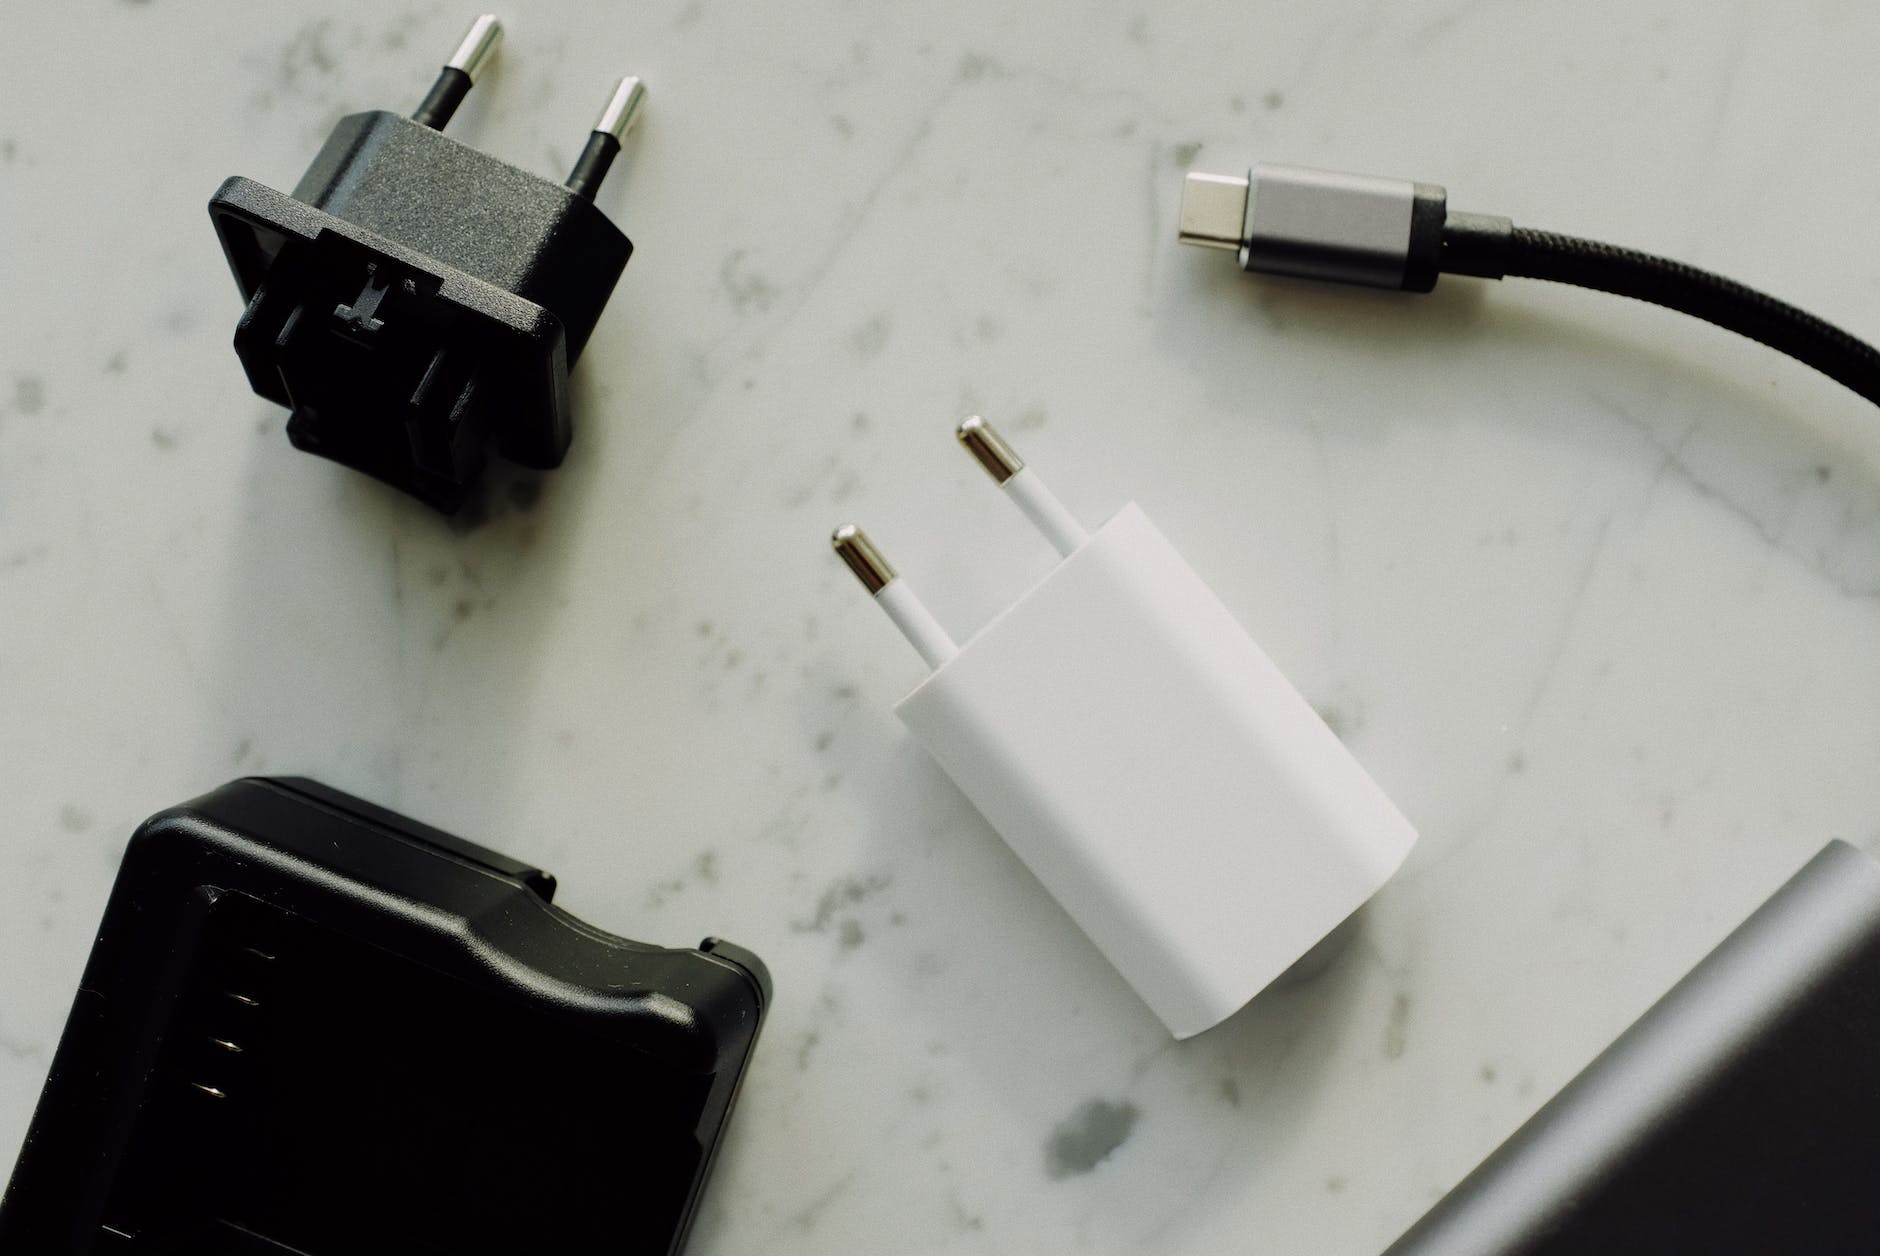 white and black adapter on white surface